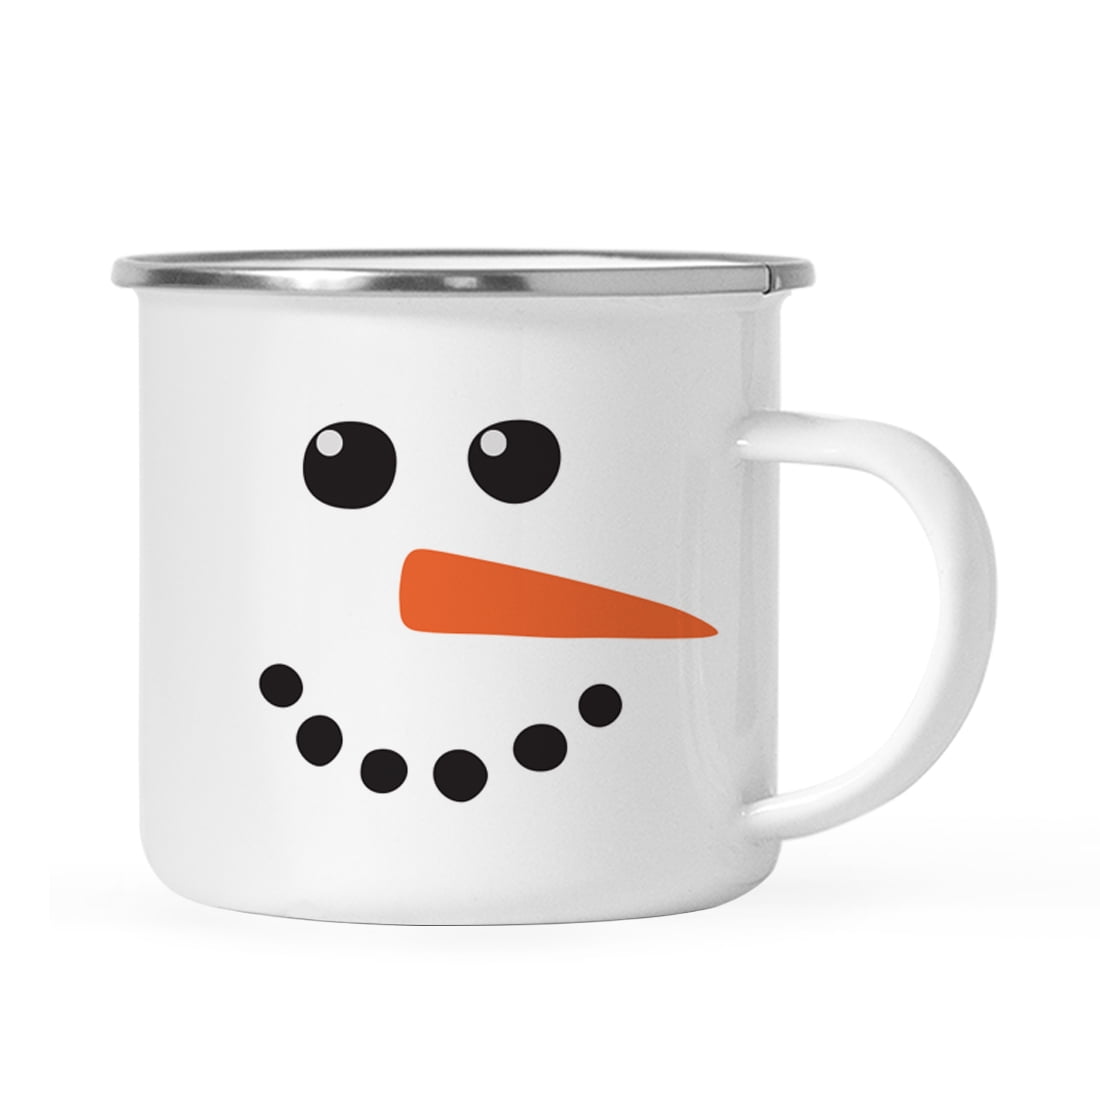 Details about   2 CHRISTMAS COFFEE COCOA MUGS KITCHEN TOWELS GINGERBREAD SNOWMAN SNOWFLAKE SANTA 